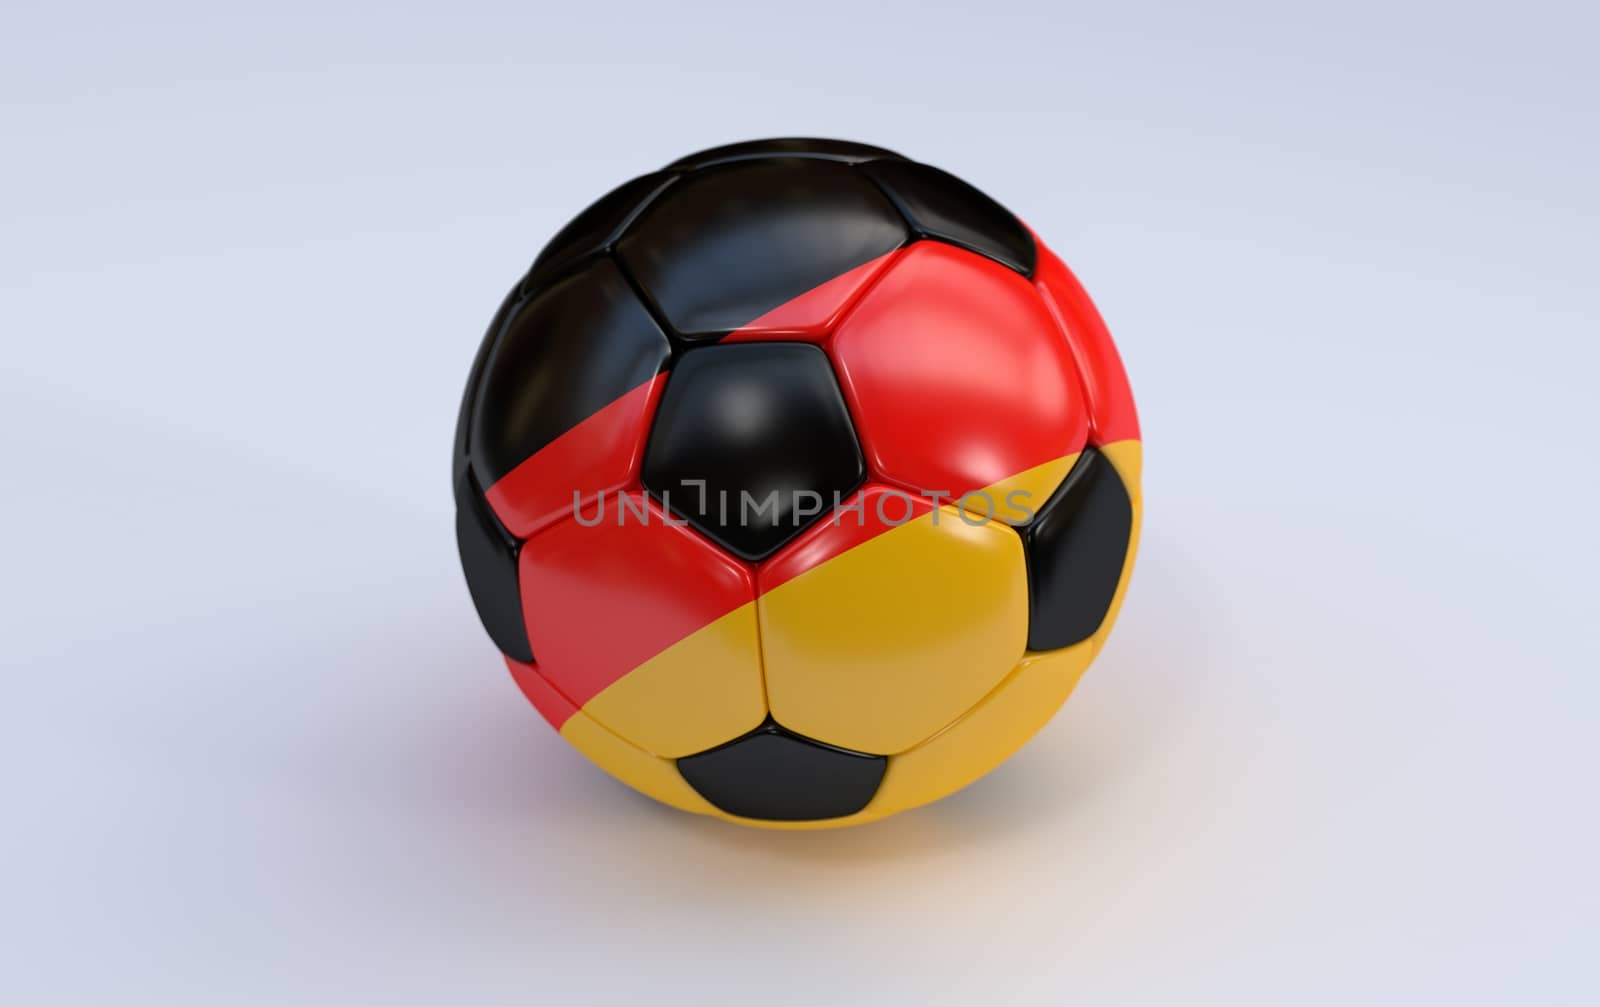 Soccer ball with Germany flag by Barbraford